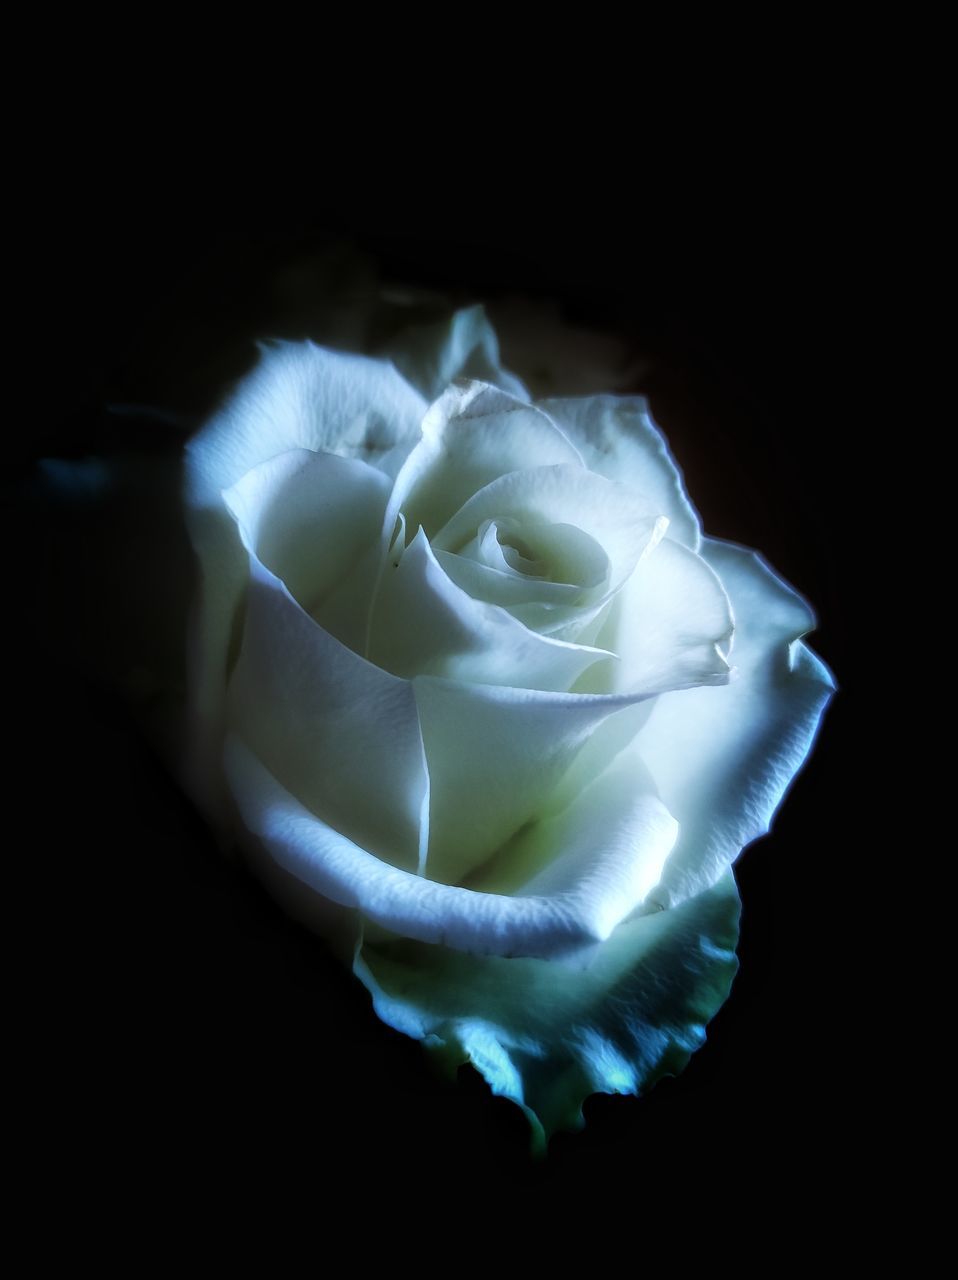 flower, rose, black background, petal, beauty in nature, plant, white, studio shot, macro photography, garden roses, close-up, flowering plant, freshness, nature, no people, fragility, indoors, inflorescence, flower head, yellow, single object, blue, darkness, copy space